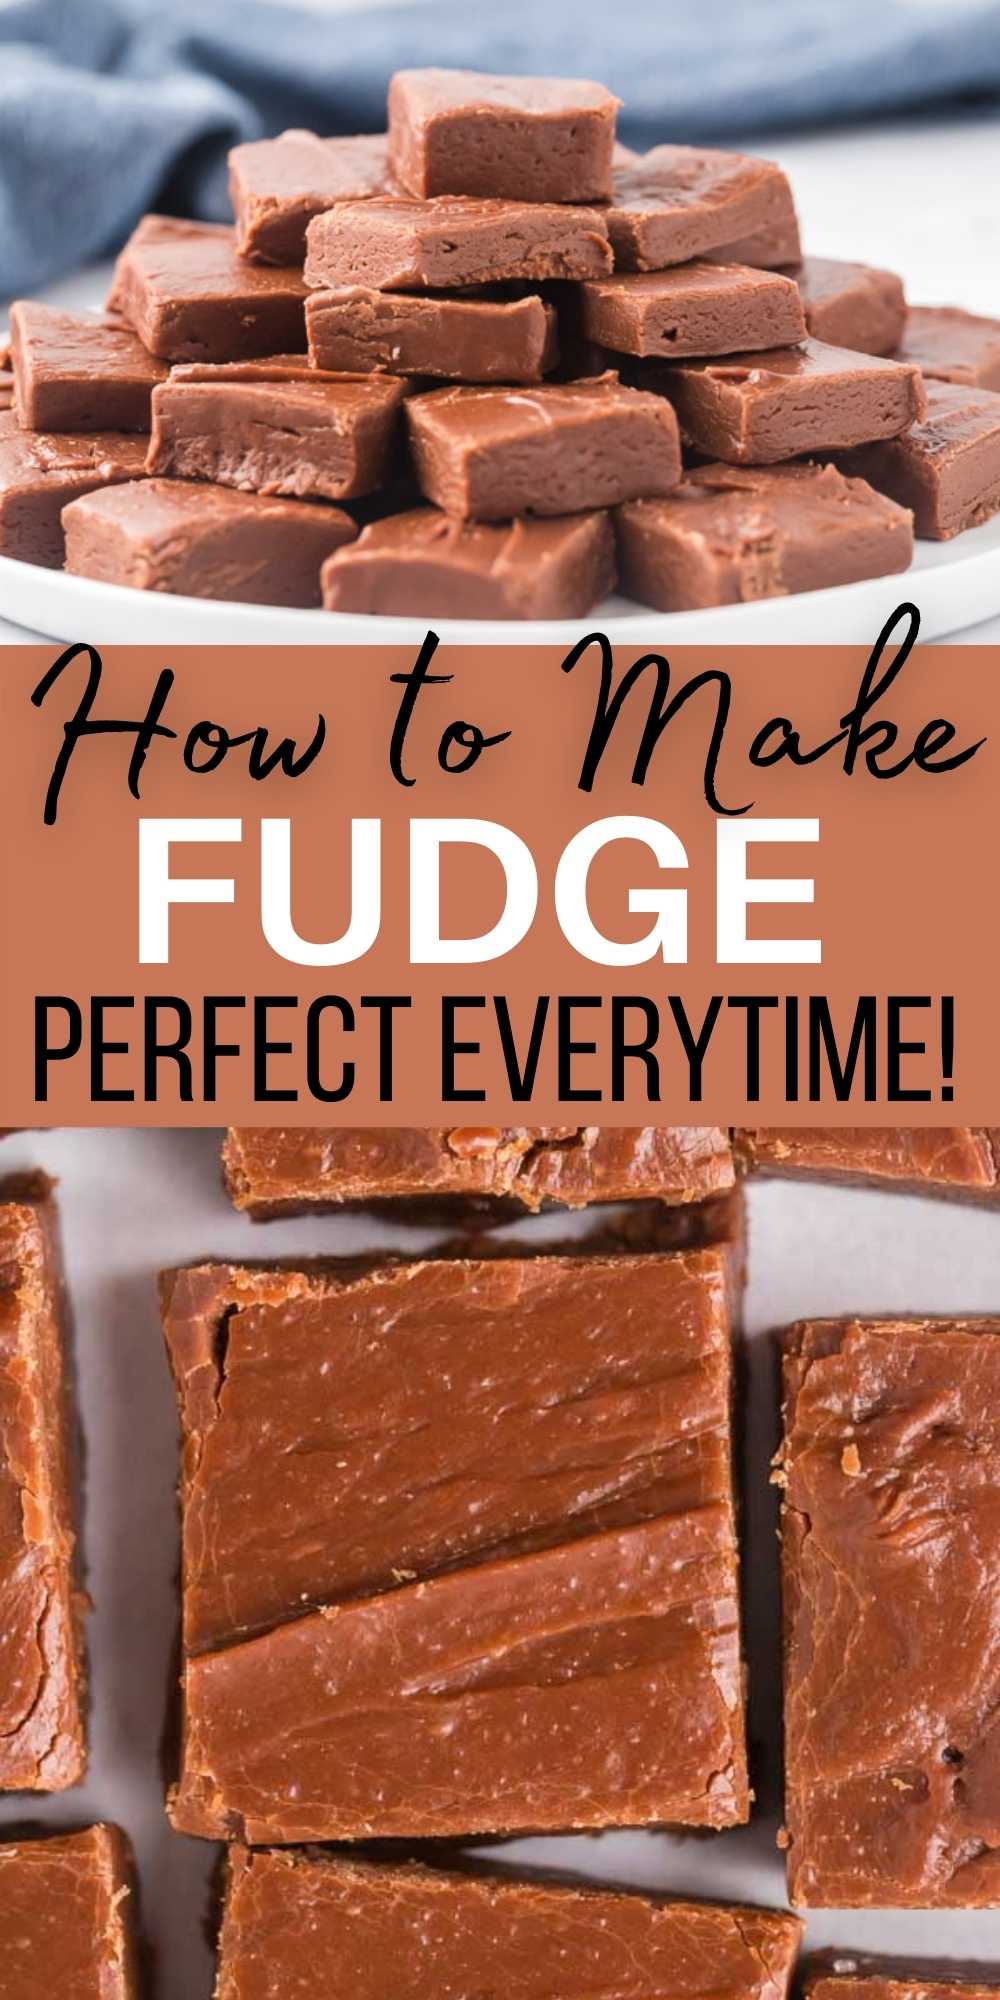 How to make the best fudge! 5 tips to make the perfect fudge recipe without condensed milk. Easy tips so you never mess up a fudge recipe. Perfect for Christmas gifts or for the best dessert.  Learn how to make fudge!  It’s easier than you think! #eatingonadime #fudgerecipes #holidaydesserts #holidaydesserts #easyfudge #fudgetips 
